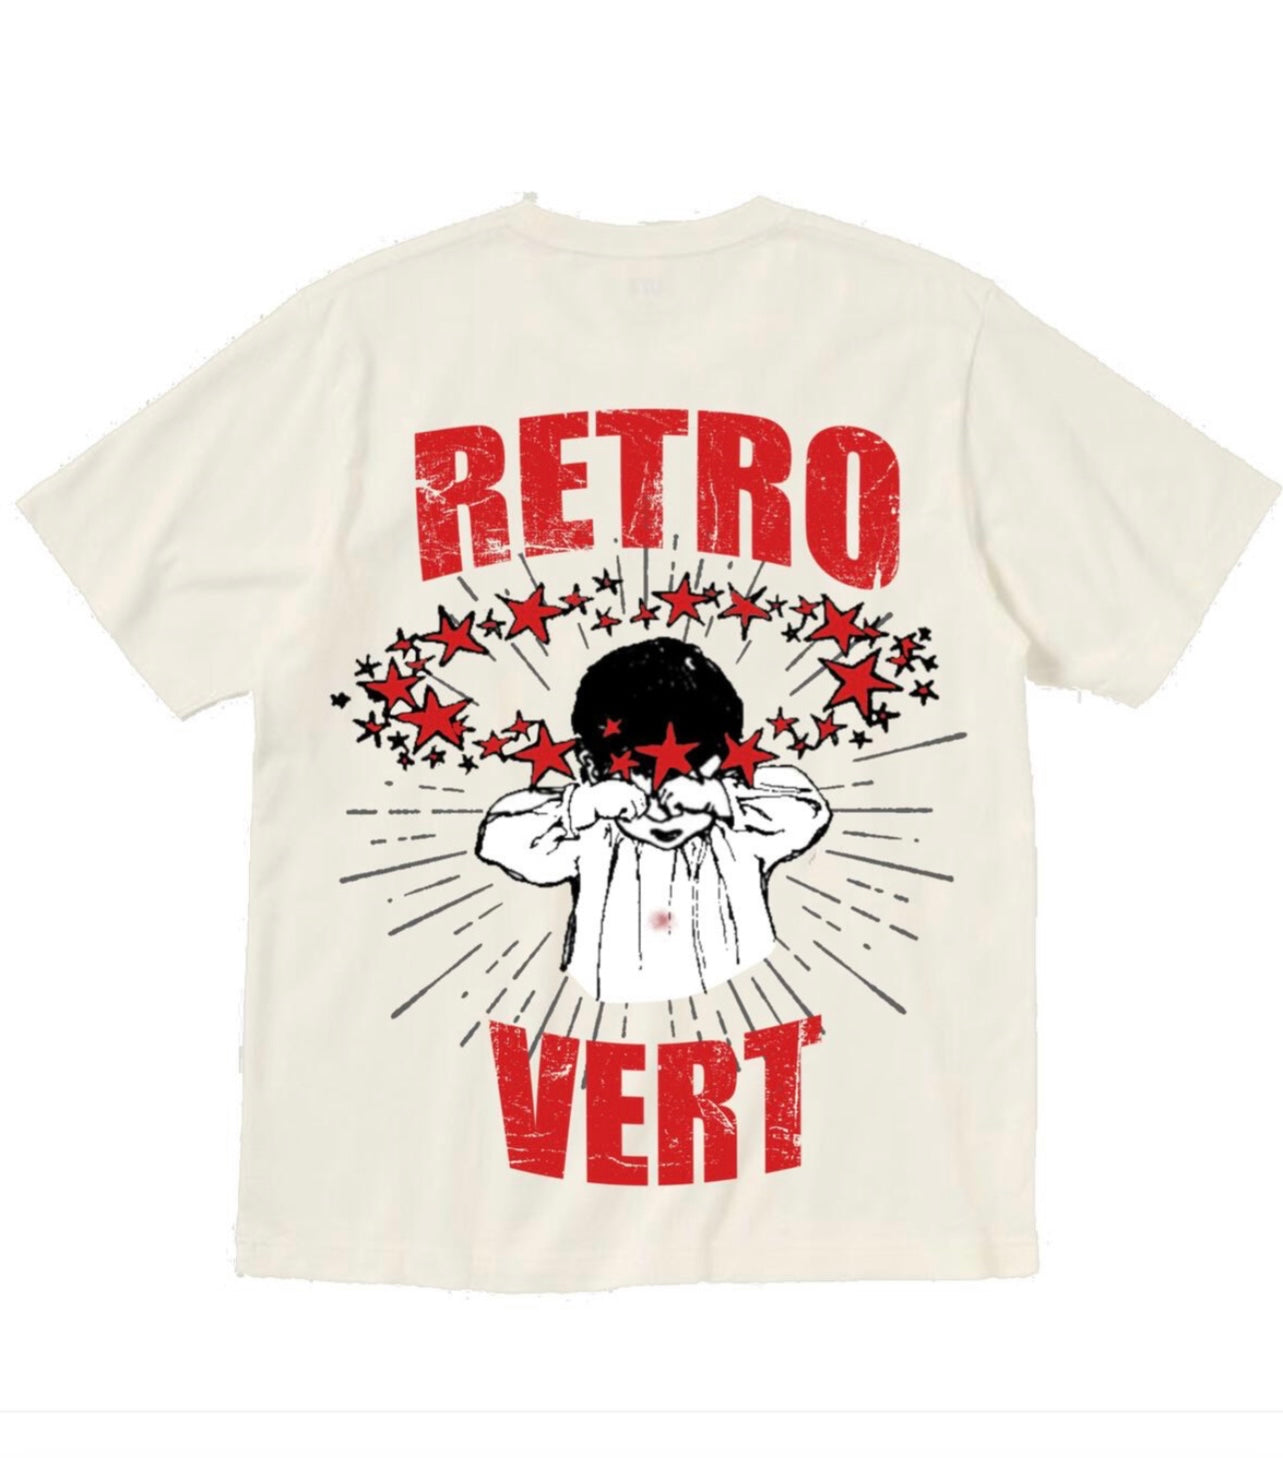 RETROVERT - Crybaby T-SHIRT - RED